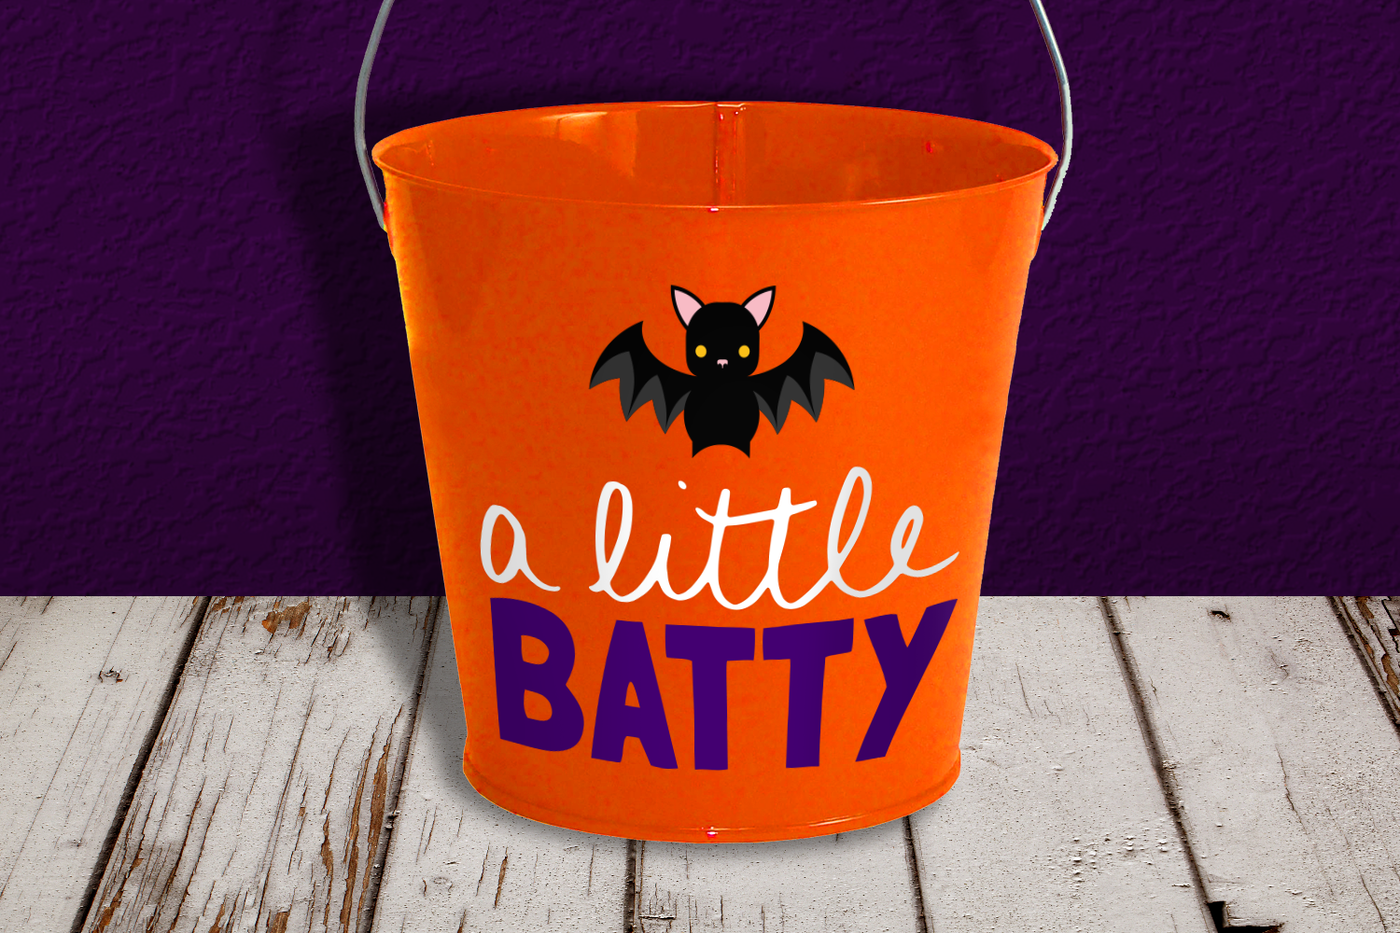 An orange pail sits on a wood floor with a purple wall behind it. There is a cute bat design and the words "a little batty"